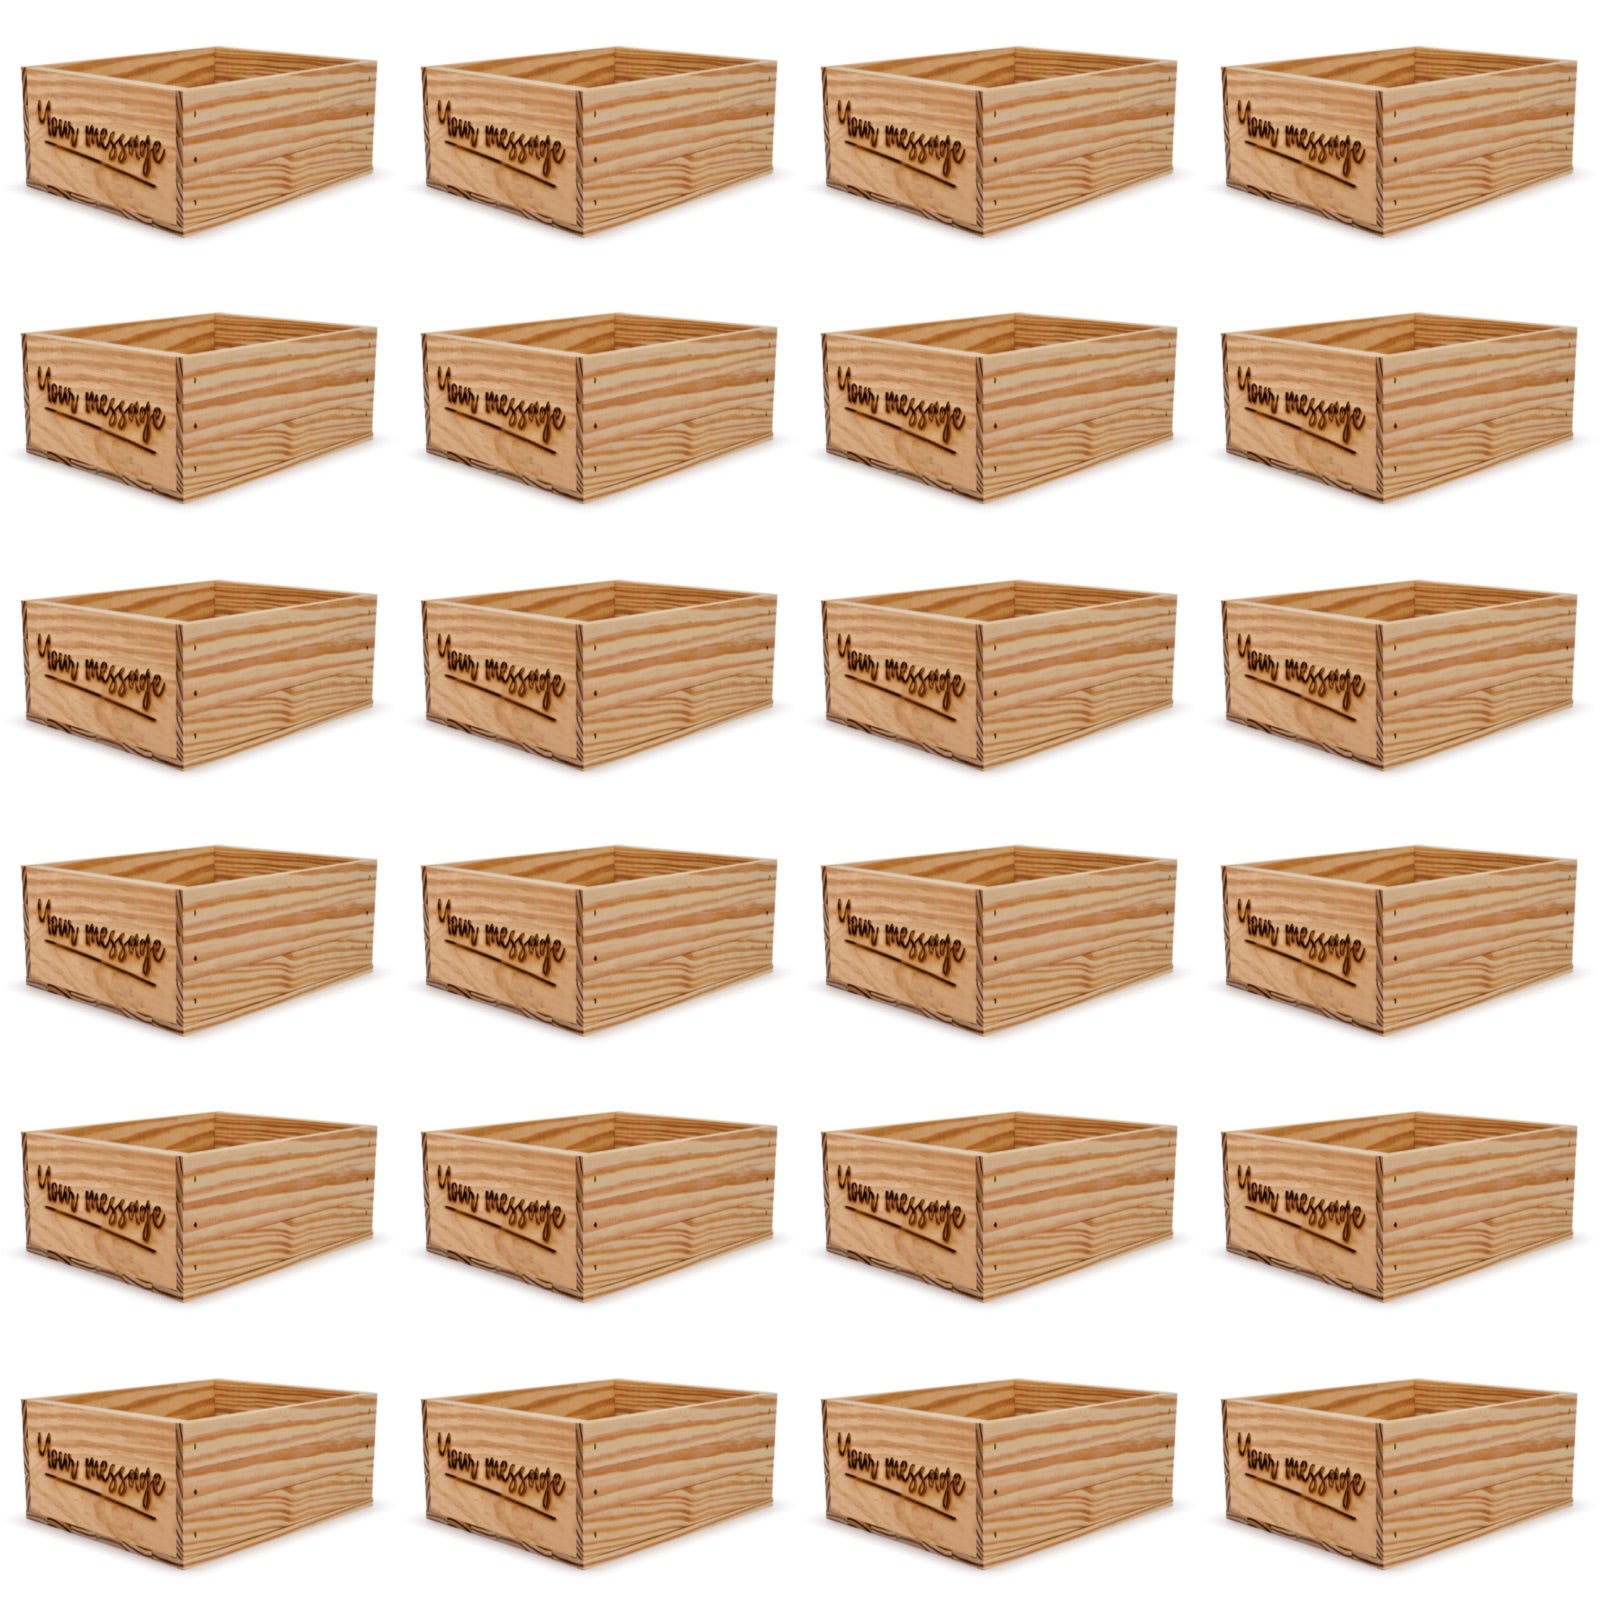 24 Small wooden crates with custom message 12x9.75x5.25